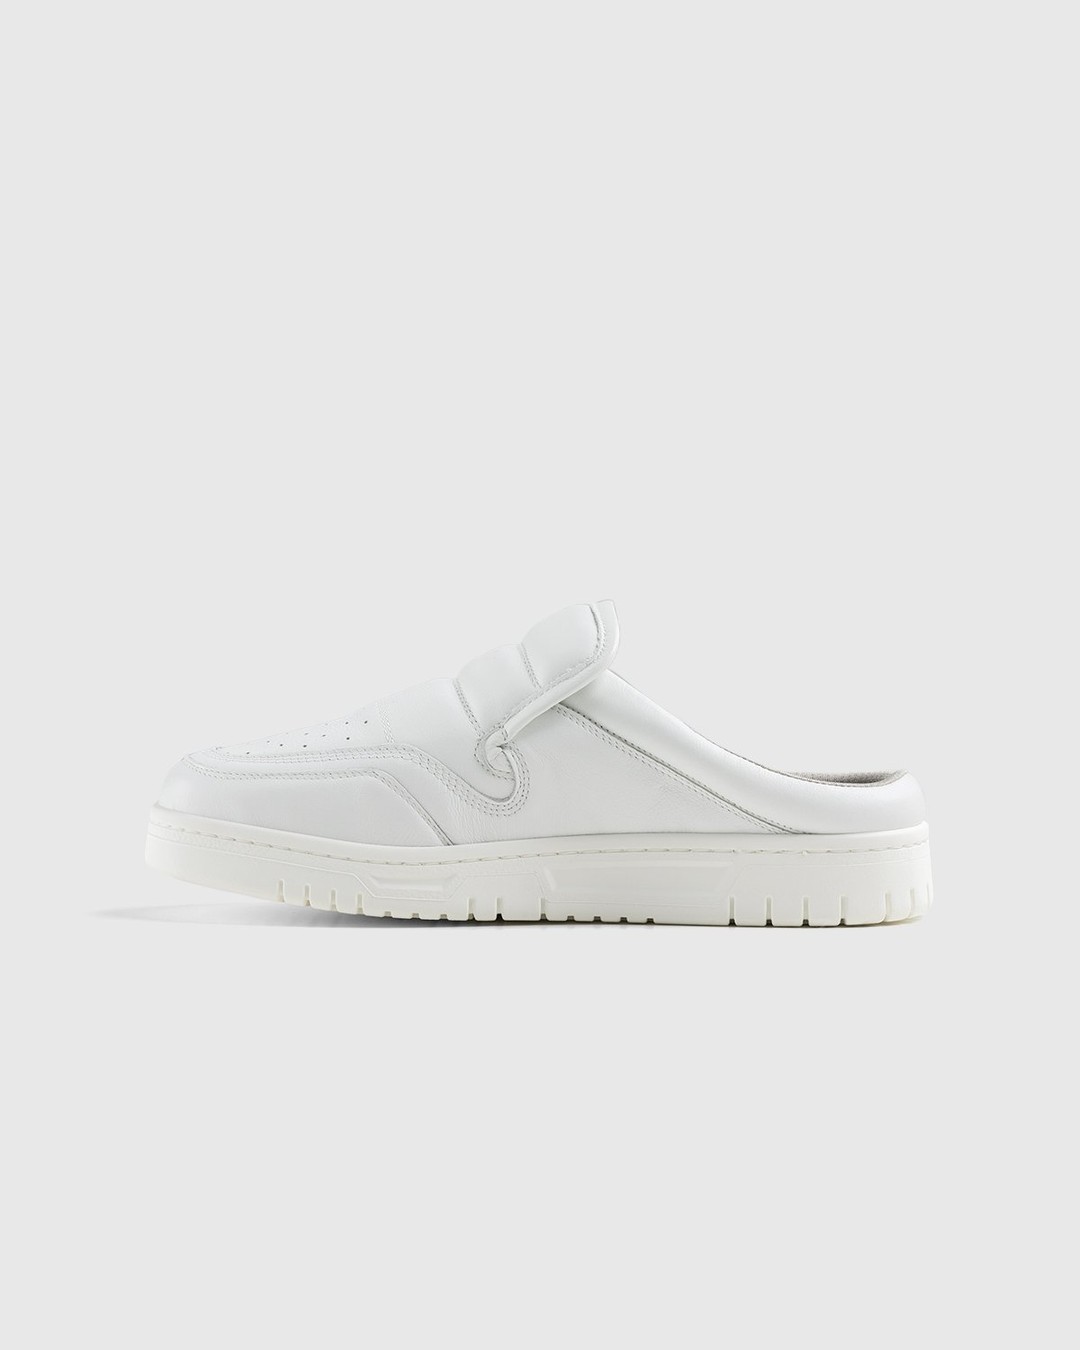 Acne Studios – Cow Leather Mule White - Mules - White - Image 2